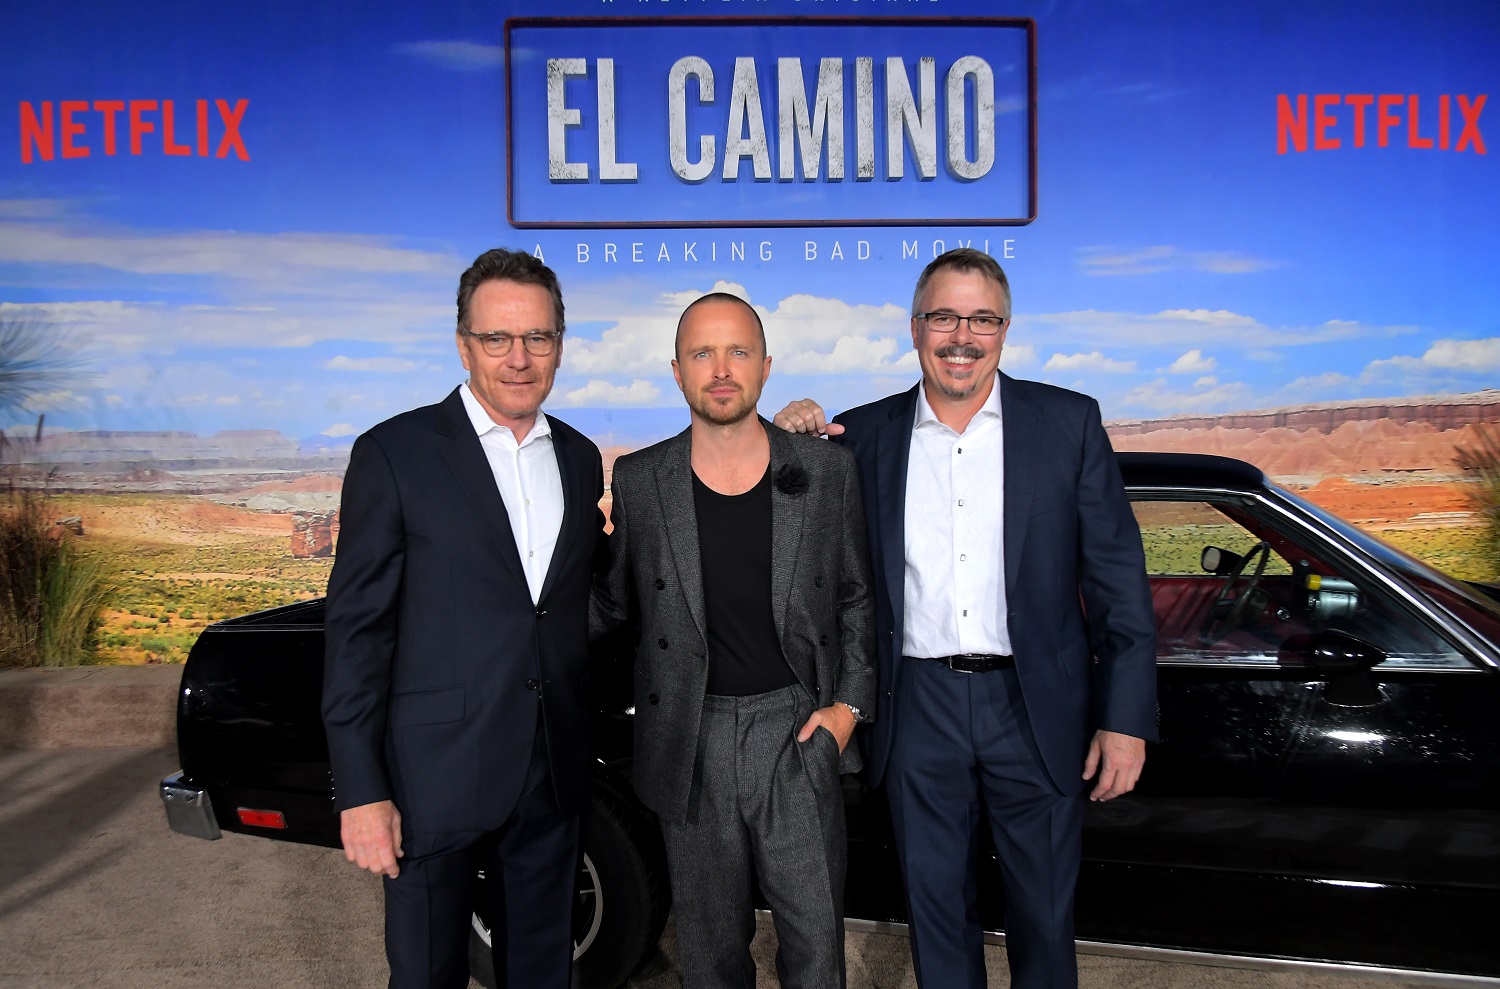 Breaking Bad stars Bryan Cranston and Aaron Paul and writer Vince Gilligan attend the World Premiere of El Camino: A Breaking Bad Movie